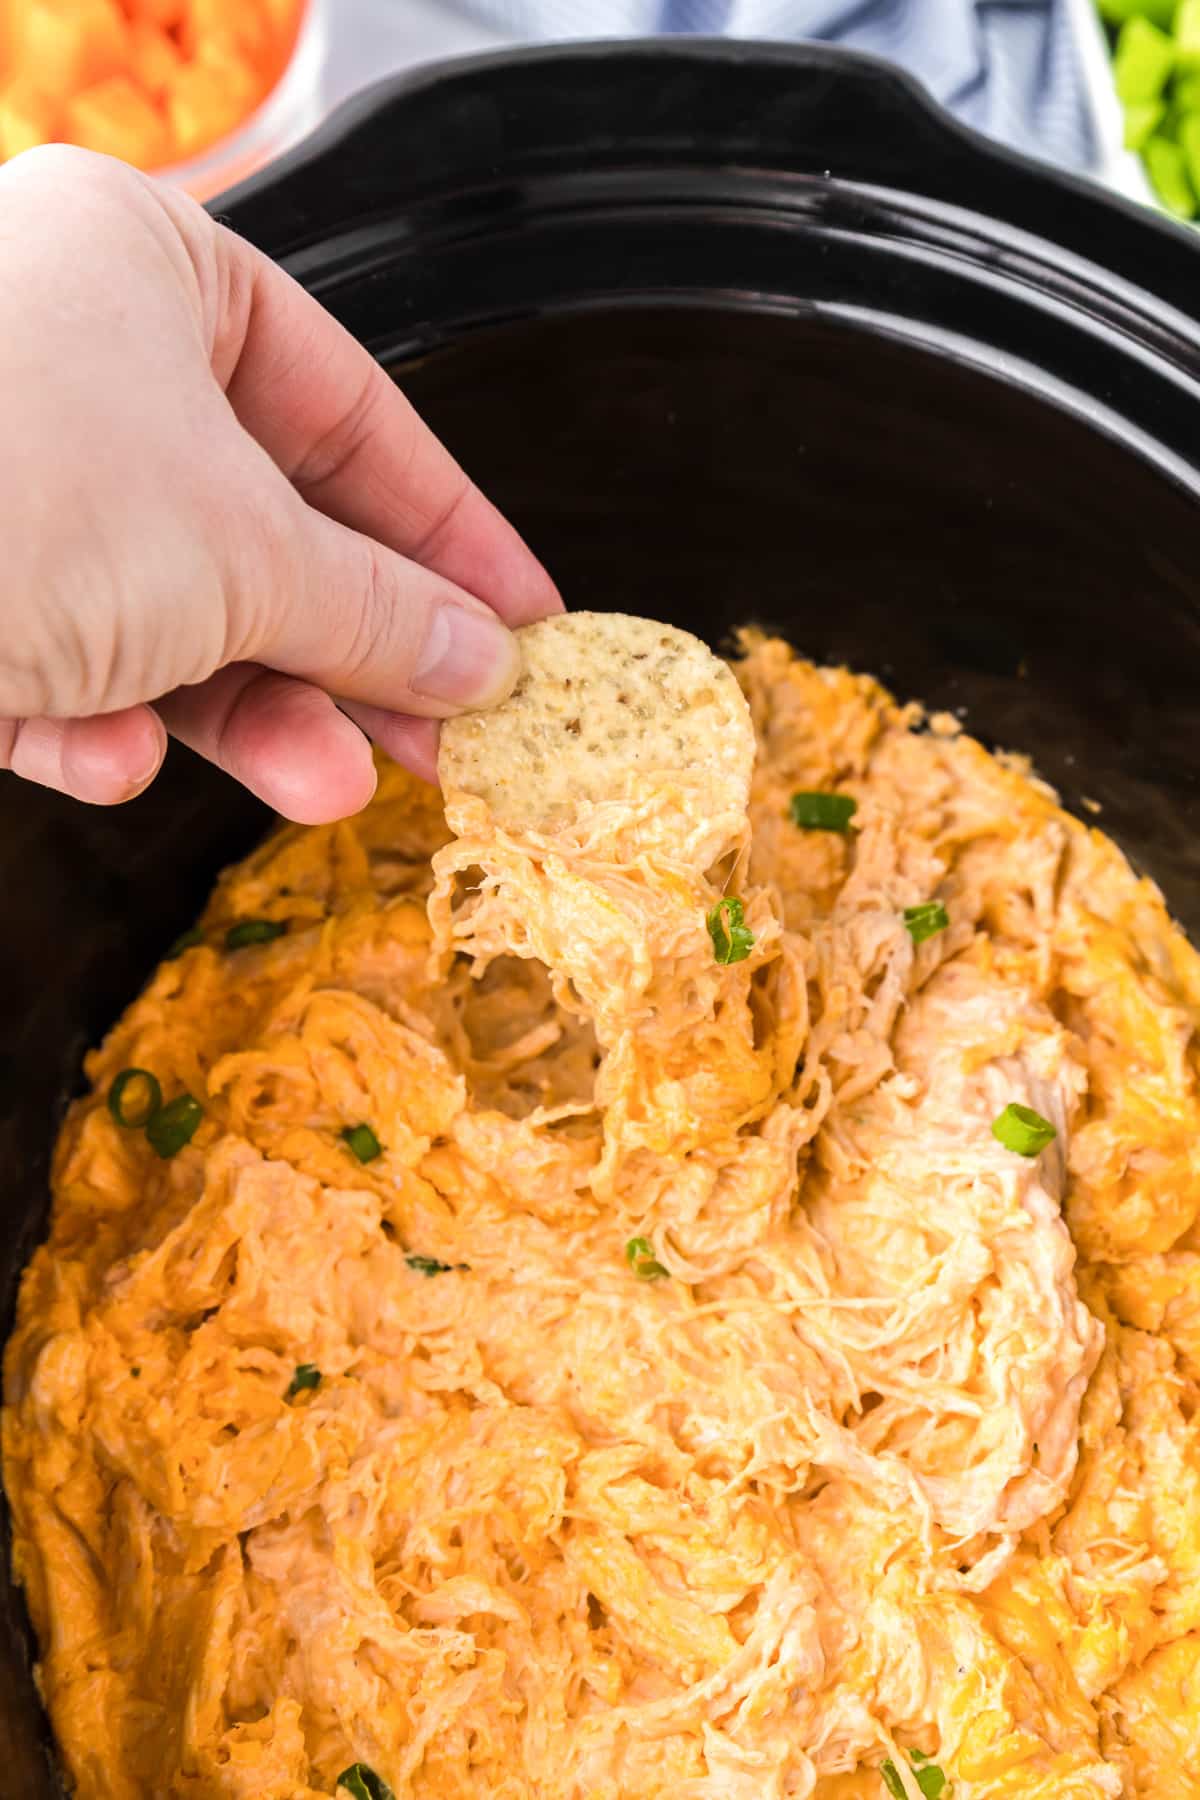 A person dipping a chip into a slow cooker bowl full of buffalo chicken dip.